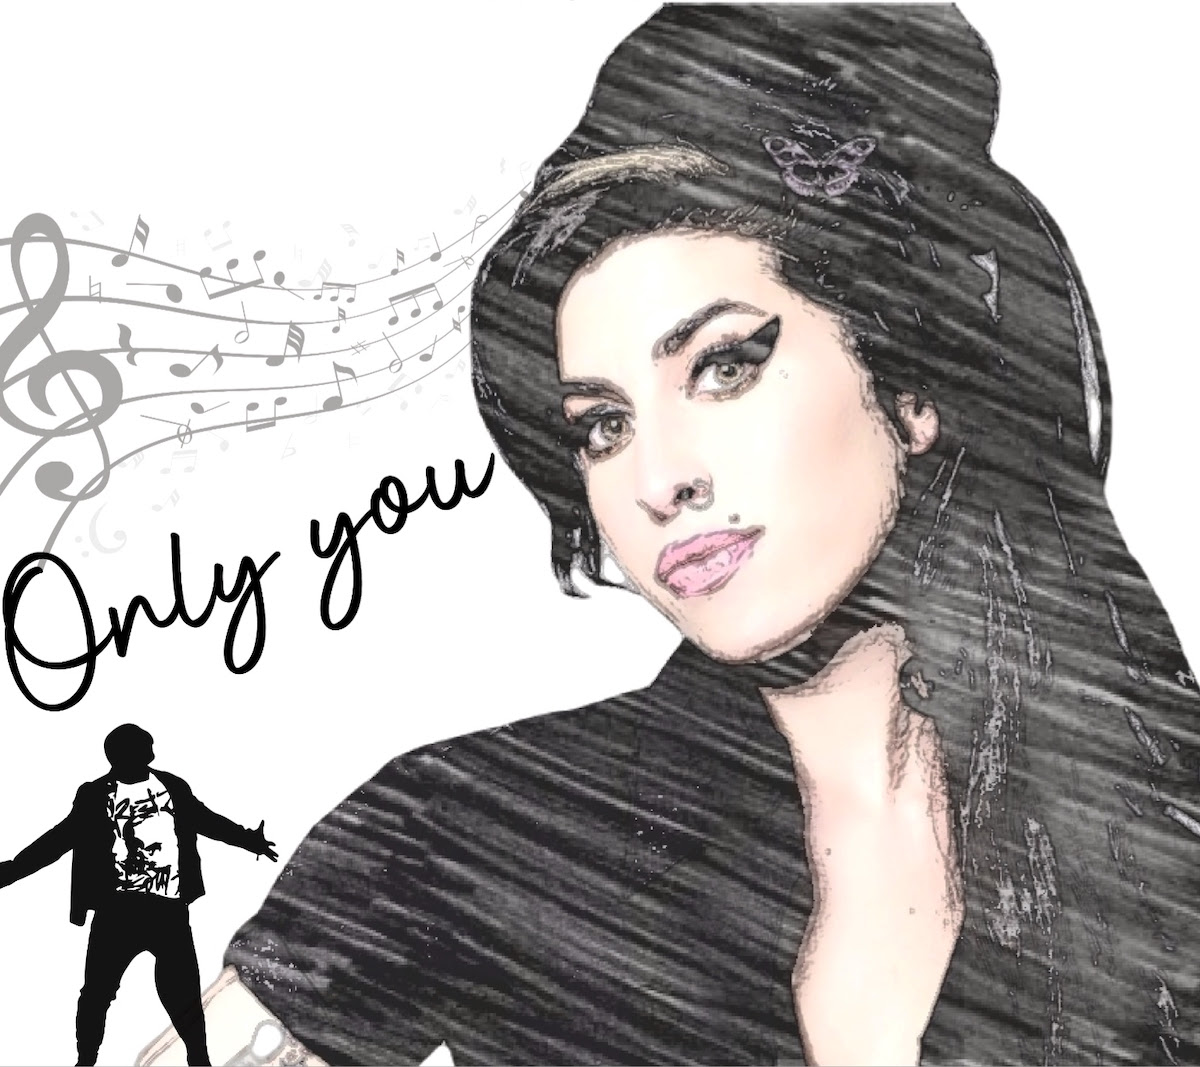 “Only you”, el particular homenaje de King Afrotech a Amy Winehouse